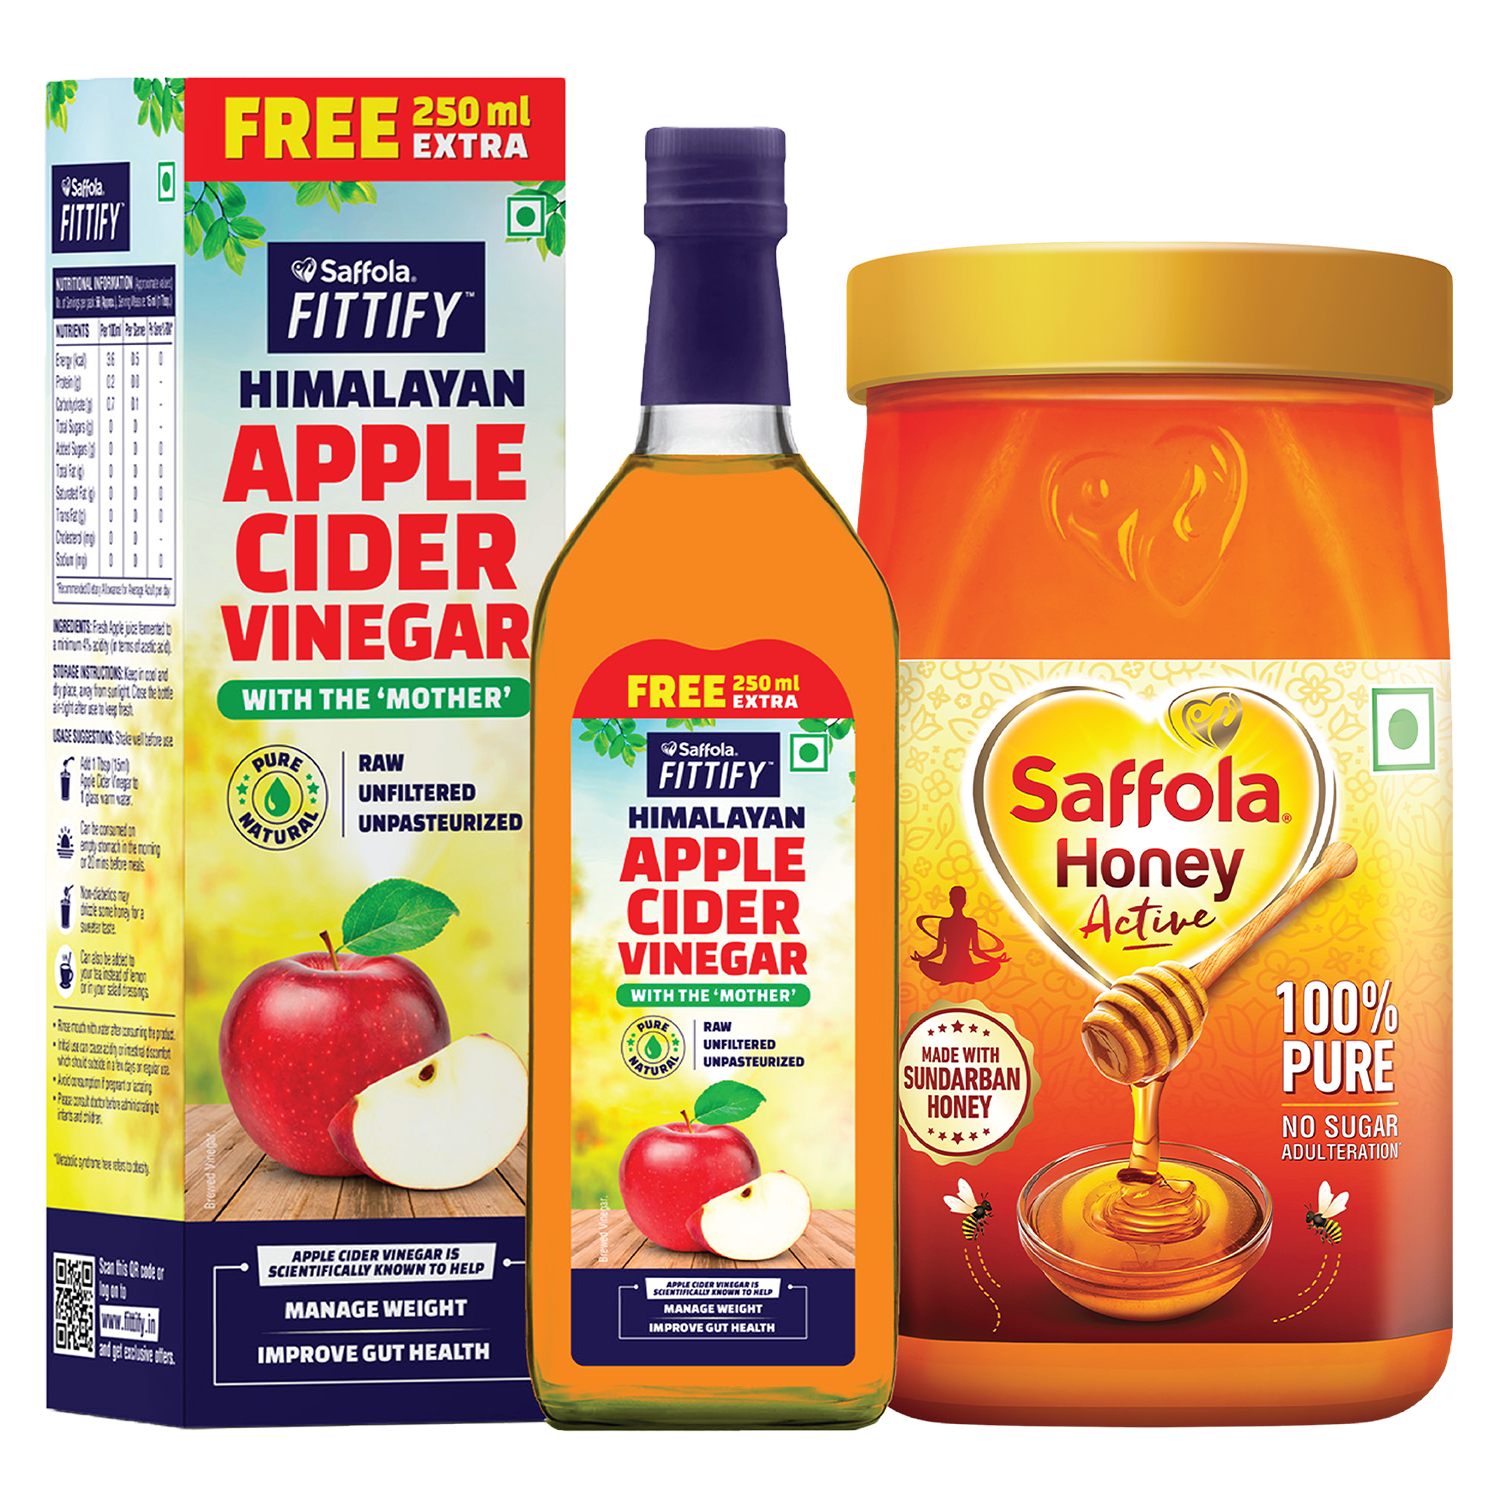 Wellness Combo (Saffola Fittify Apple Cider Vinegar with the Mother – 1000ml + Saffola Honey Active Pet Jar 1kg)